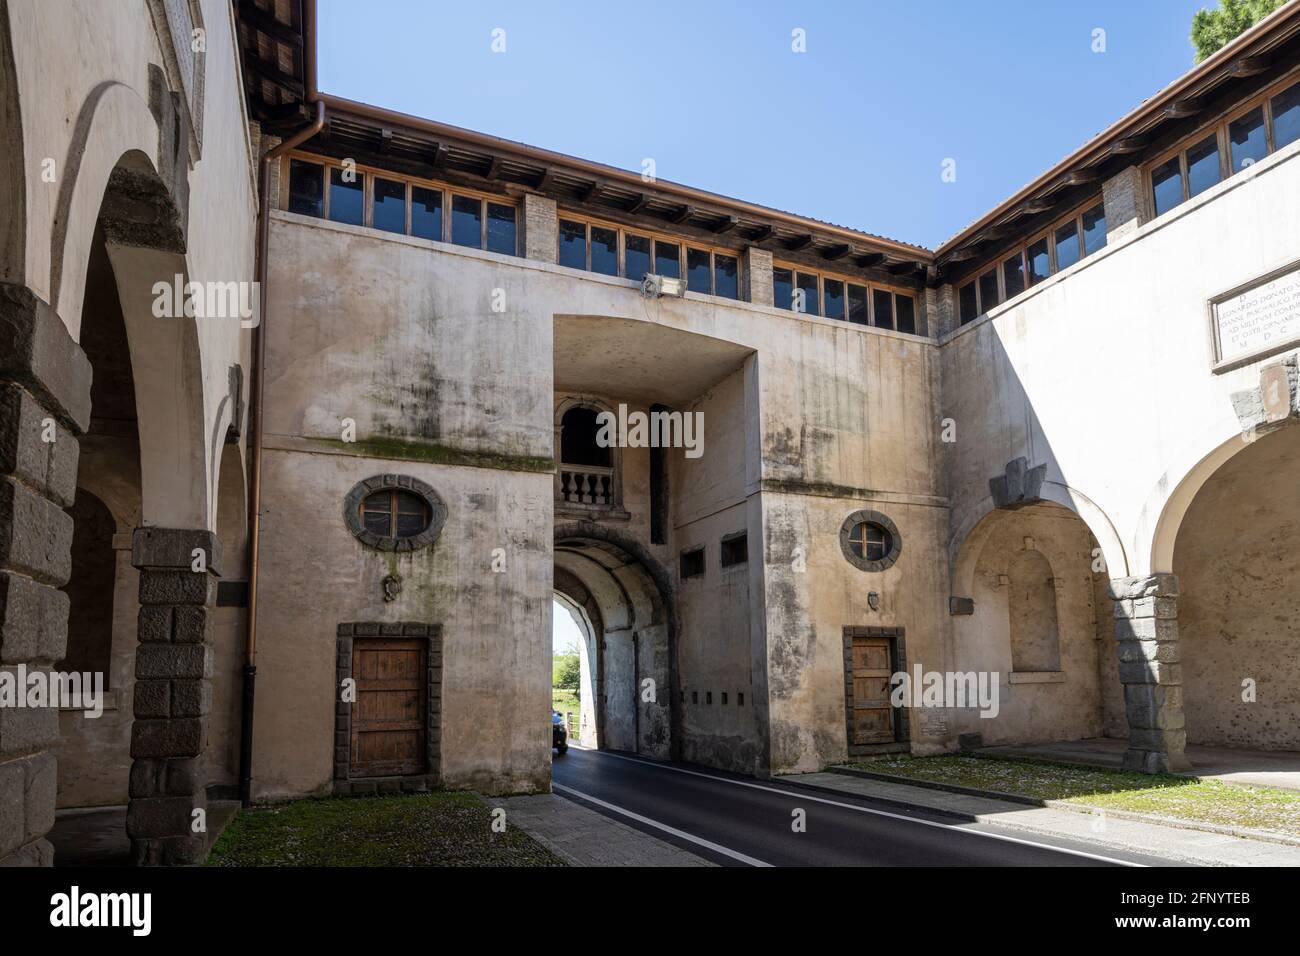 Palmanova, Italy. May 18, 2021.  View of the structure of the ancient Aquileia city gate. Stock Photo